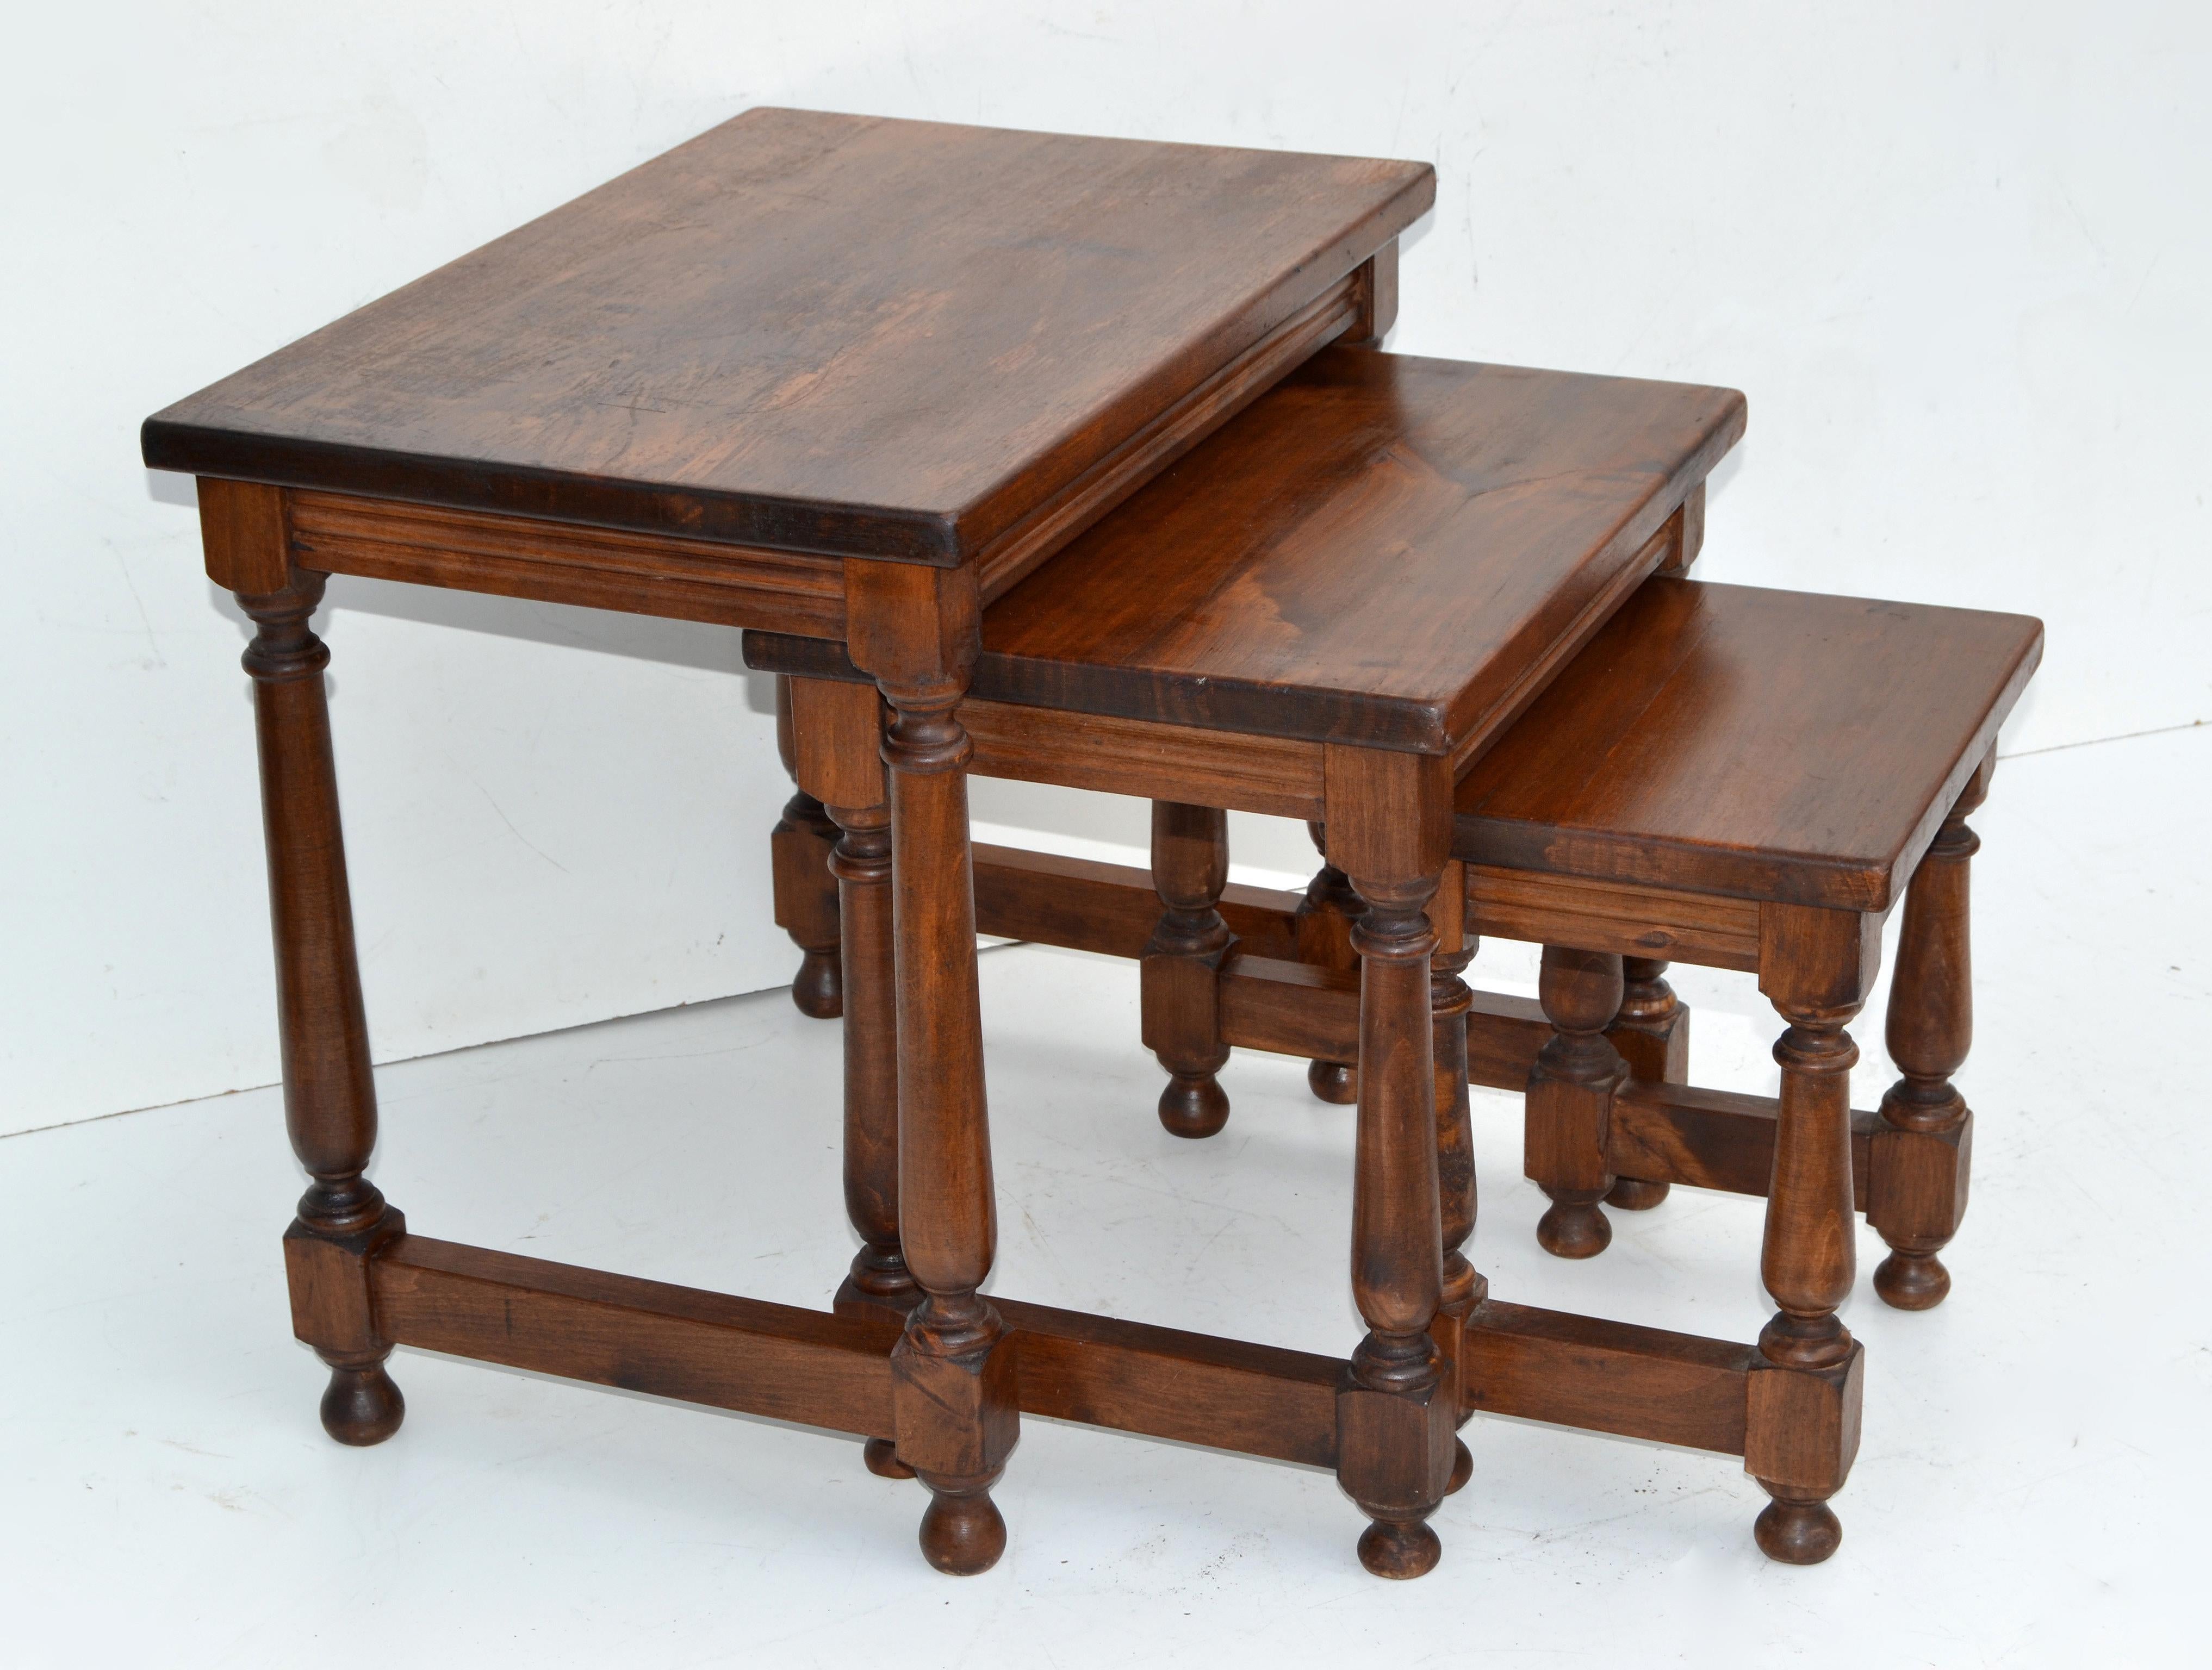 French antique oakwood set of three nesting tables, stacking tables with turned legs from the 1950s.
Size of each table:
15.5 D x 23.5 L x 21 inches H.
13.0 D x 18.25 L x 17.5 inches H.
10.0 D x 13 L x 14.25 inches H.
 